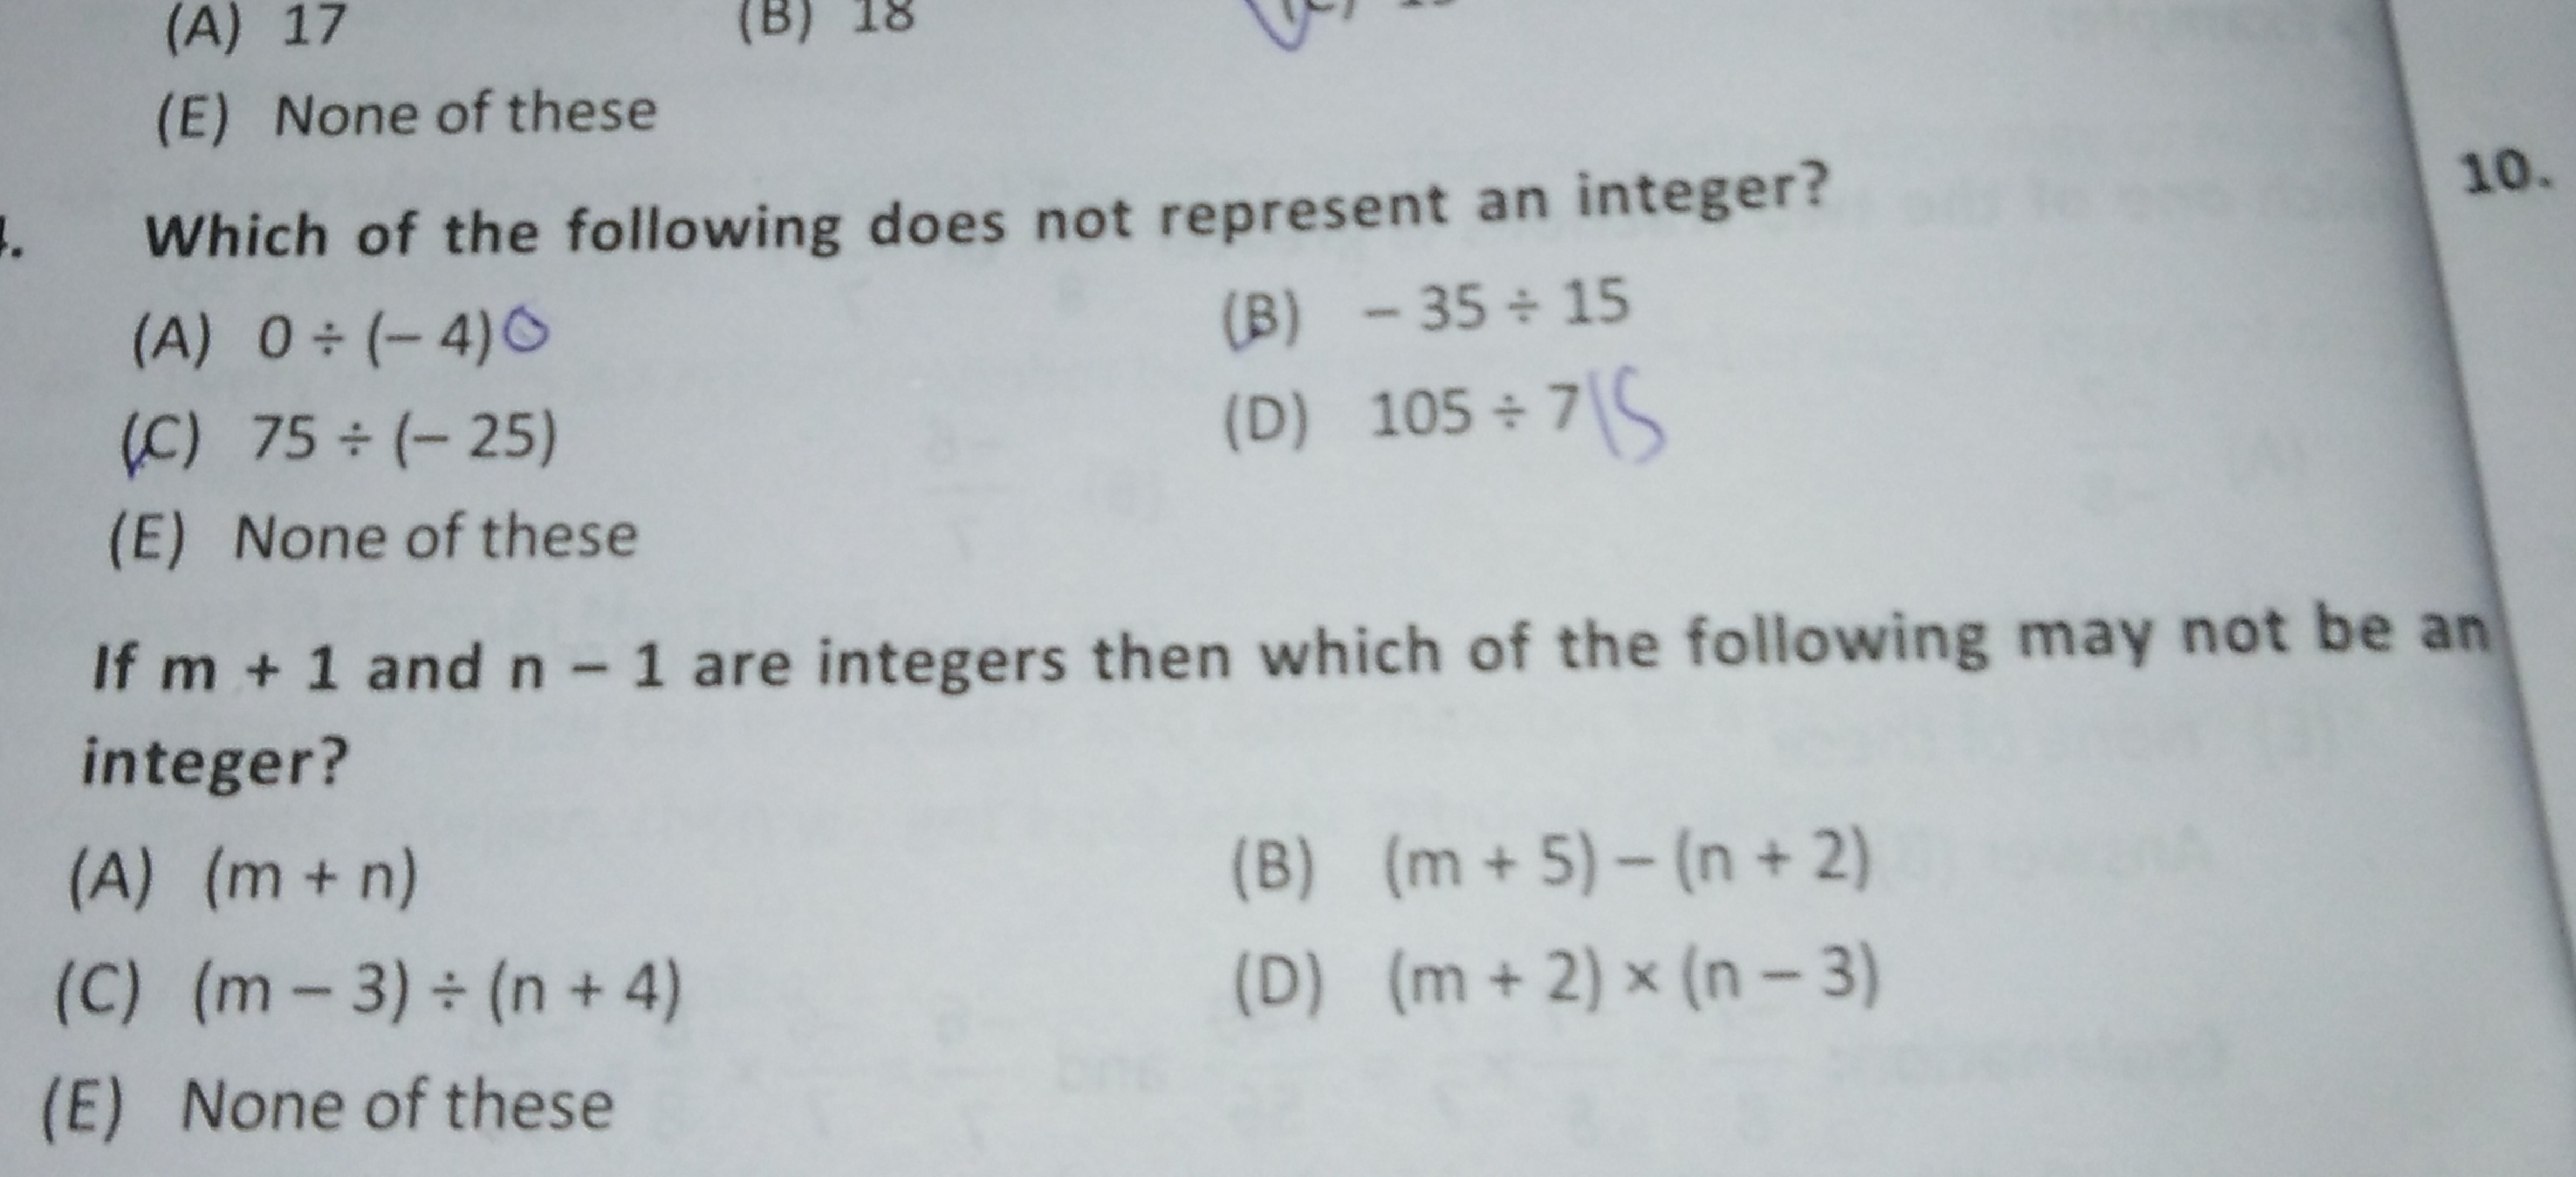 Which of the following does not represent an integer?